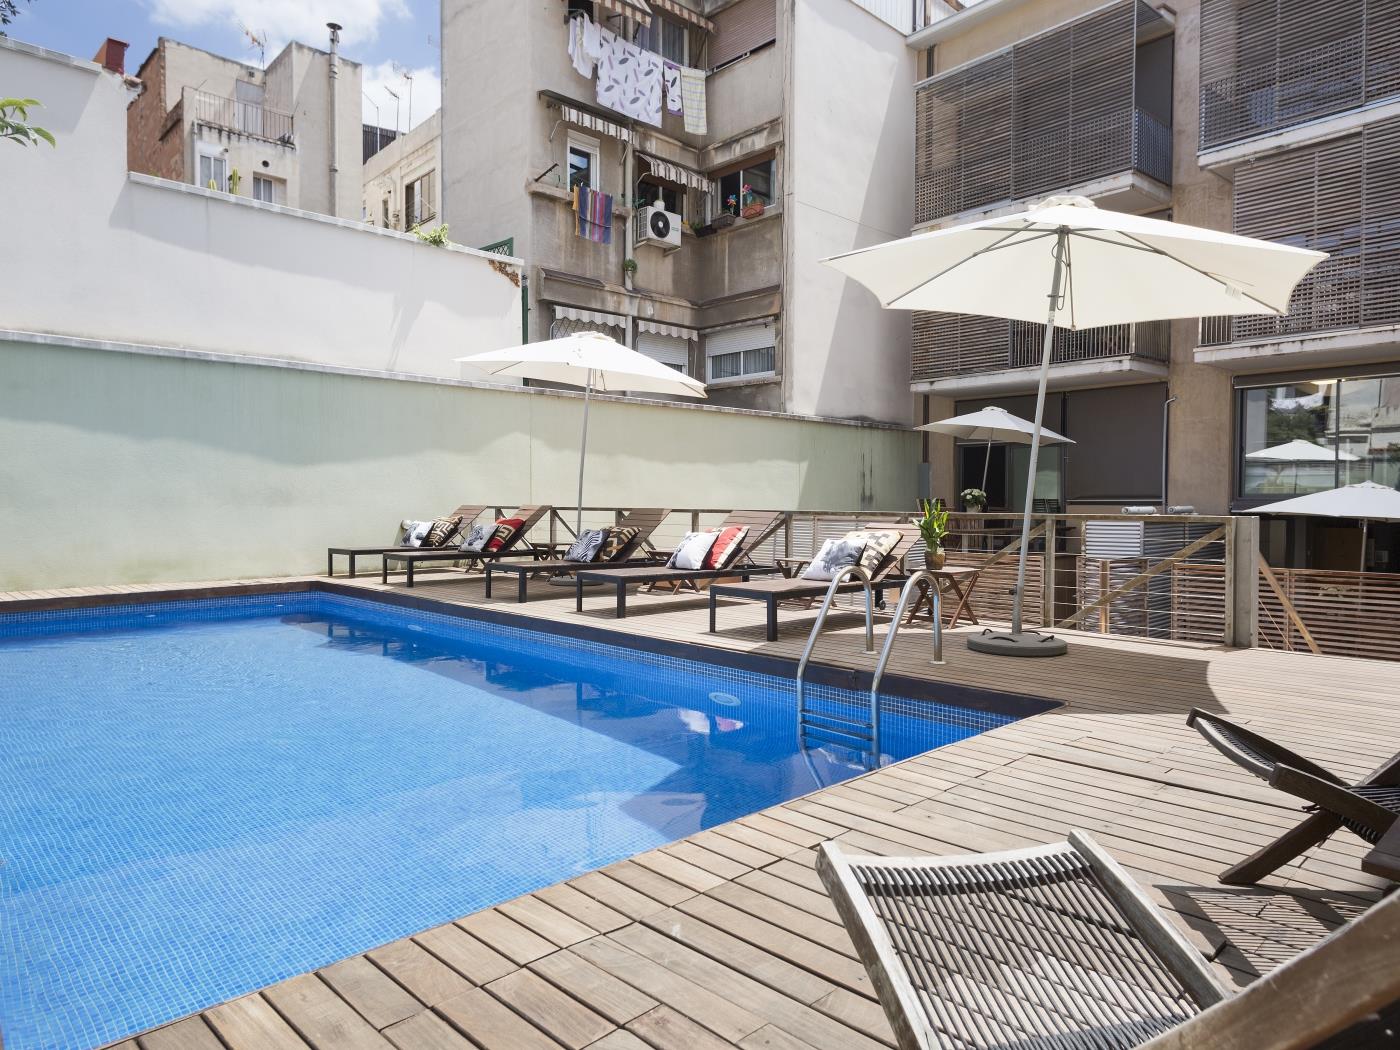 Gracia loft with privatve terrace and shared pool - My Space Barcelona Aпартаменты